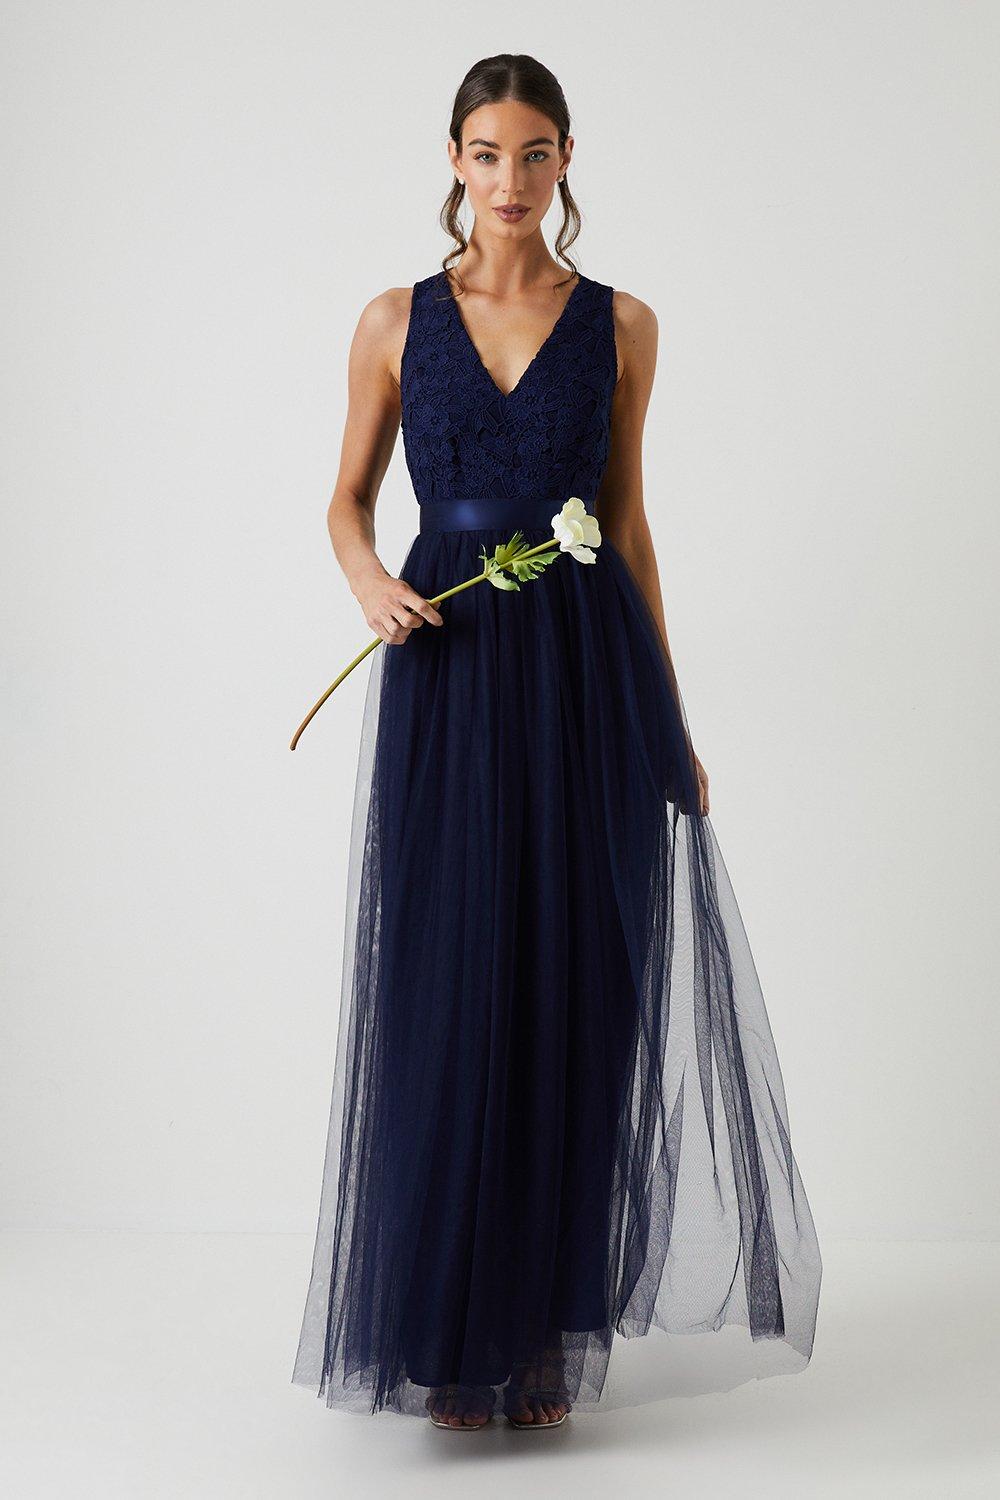 Crochet Lace Two In One Bridesmaids Maxi Dress - Navy